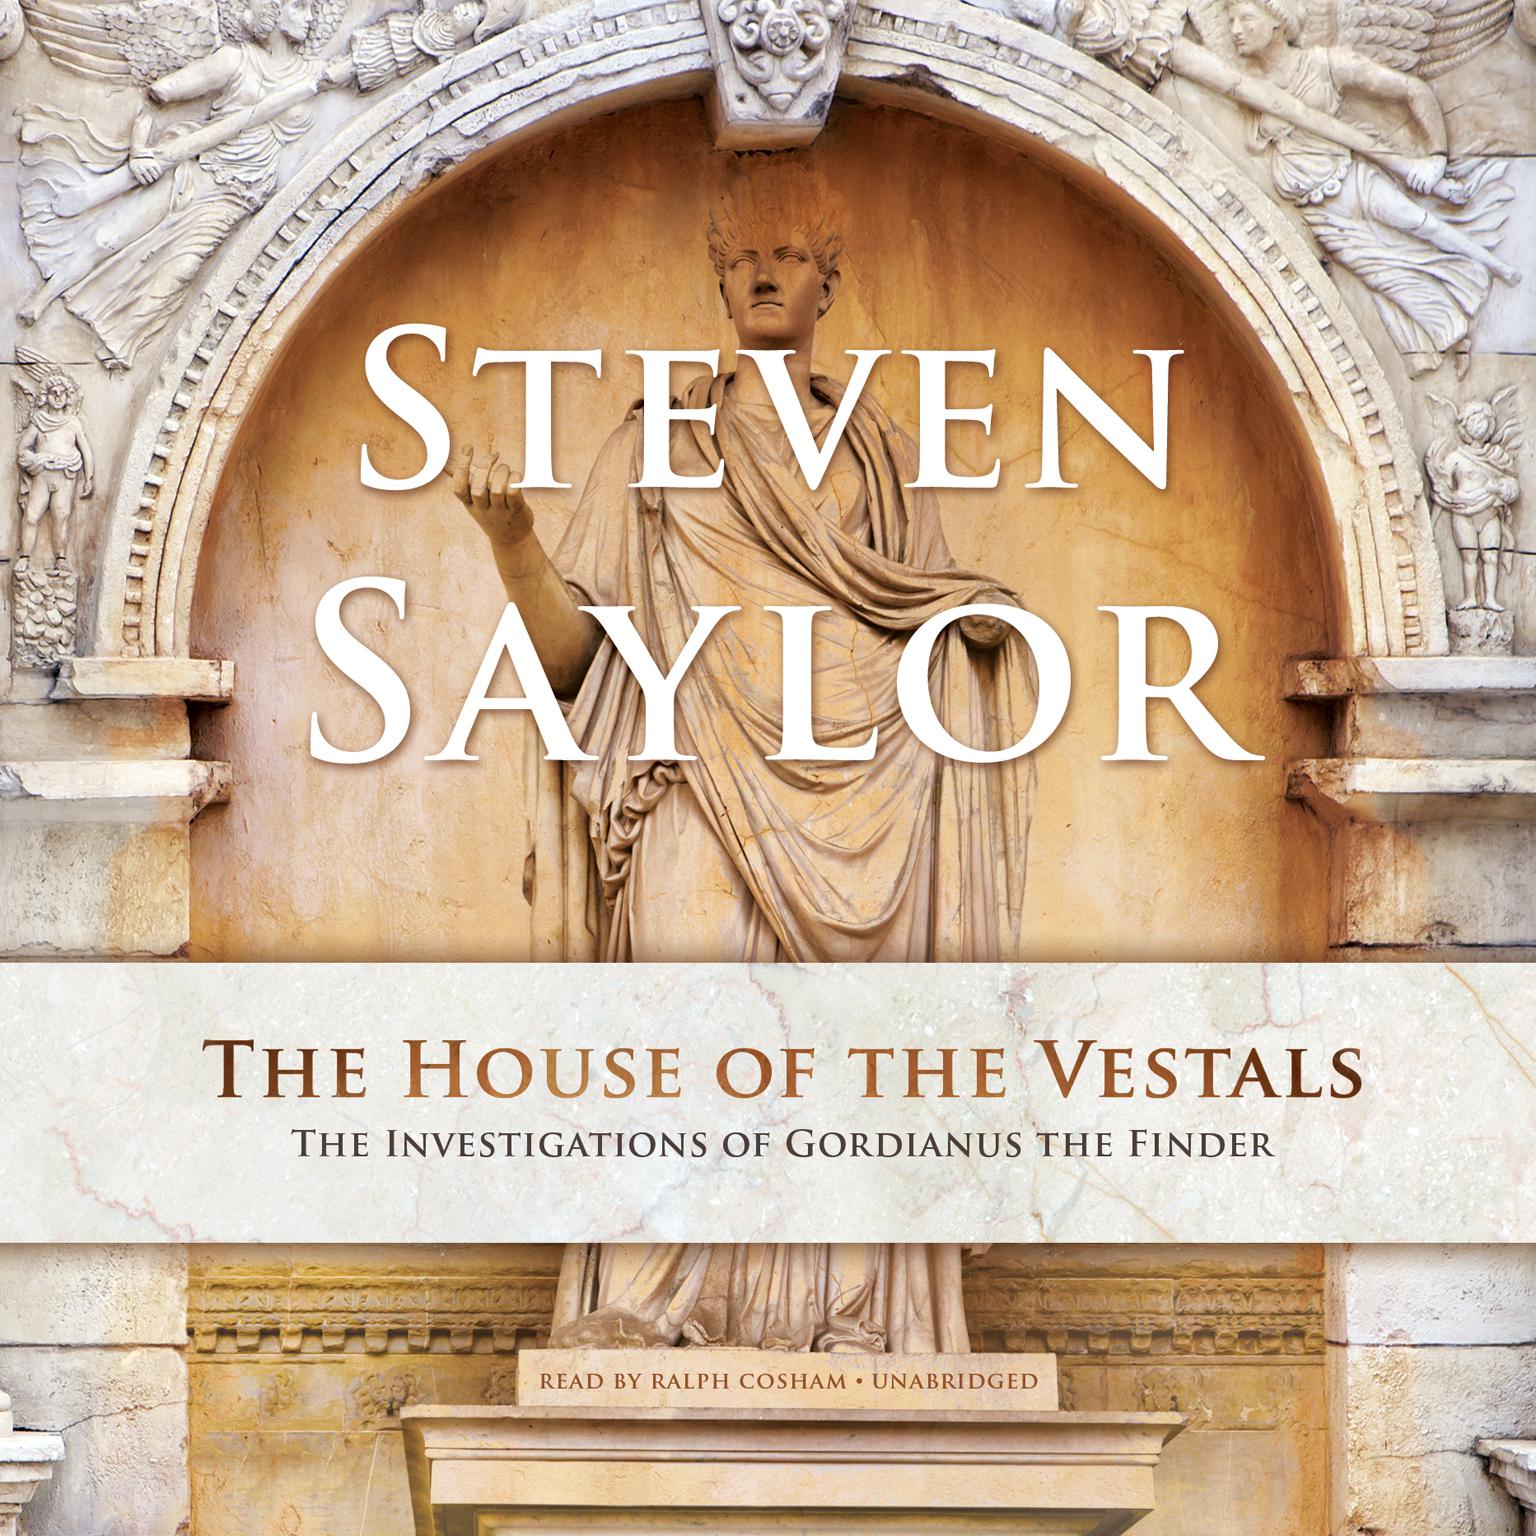 The House of the Vestals: The Investigations of Gordianus the Finder Audiobook, by Steven Saylor